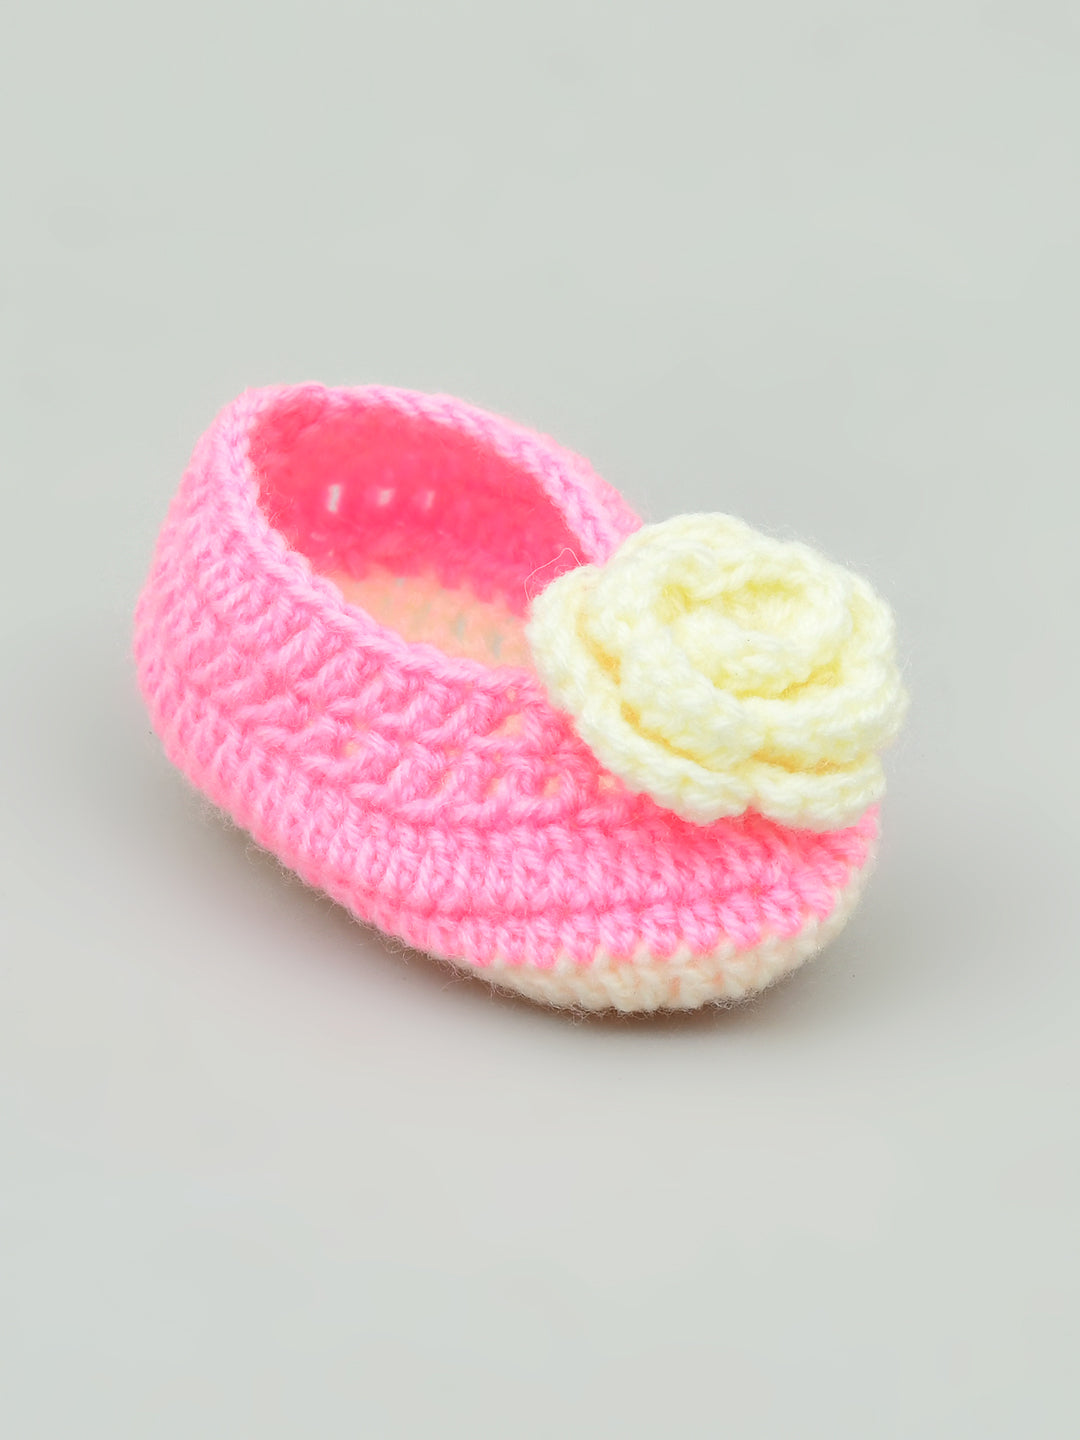 Pink Flowered Crochet Baby Booties for Girls